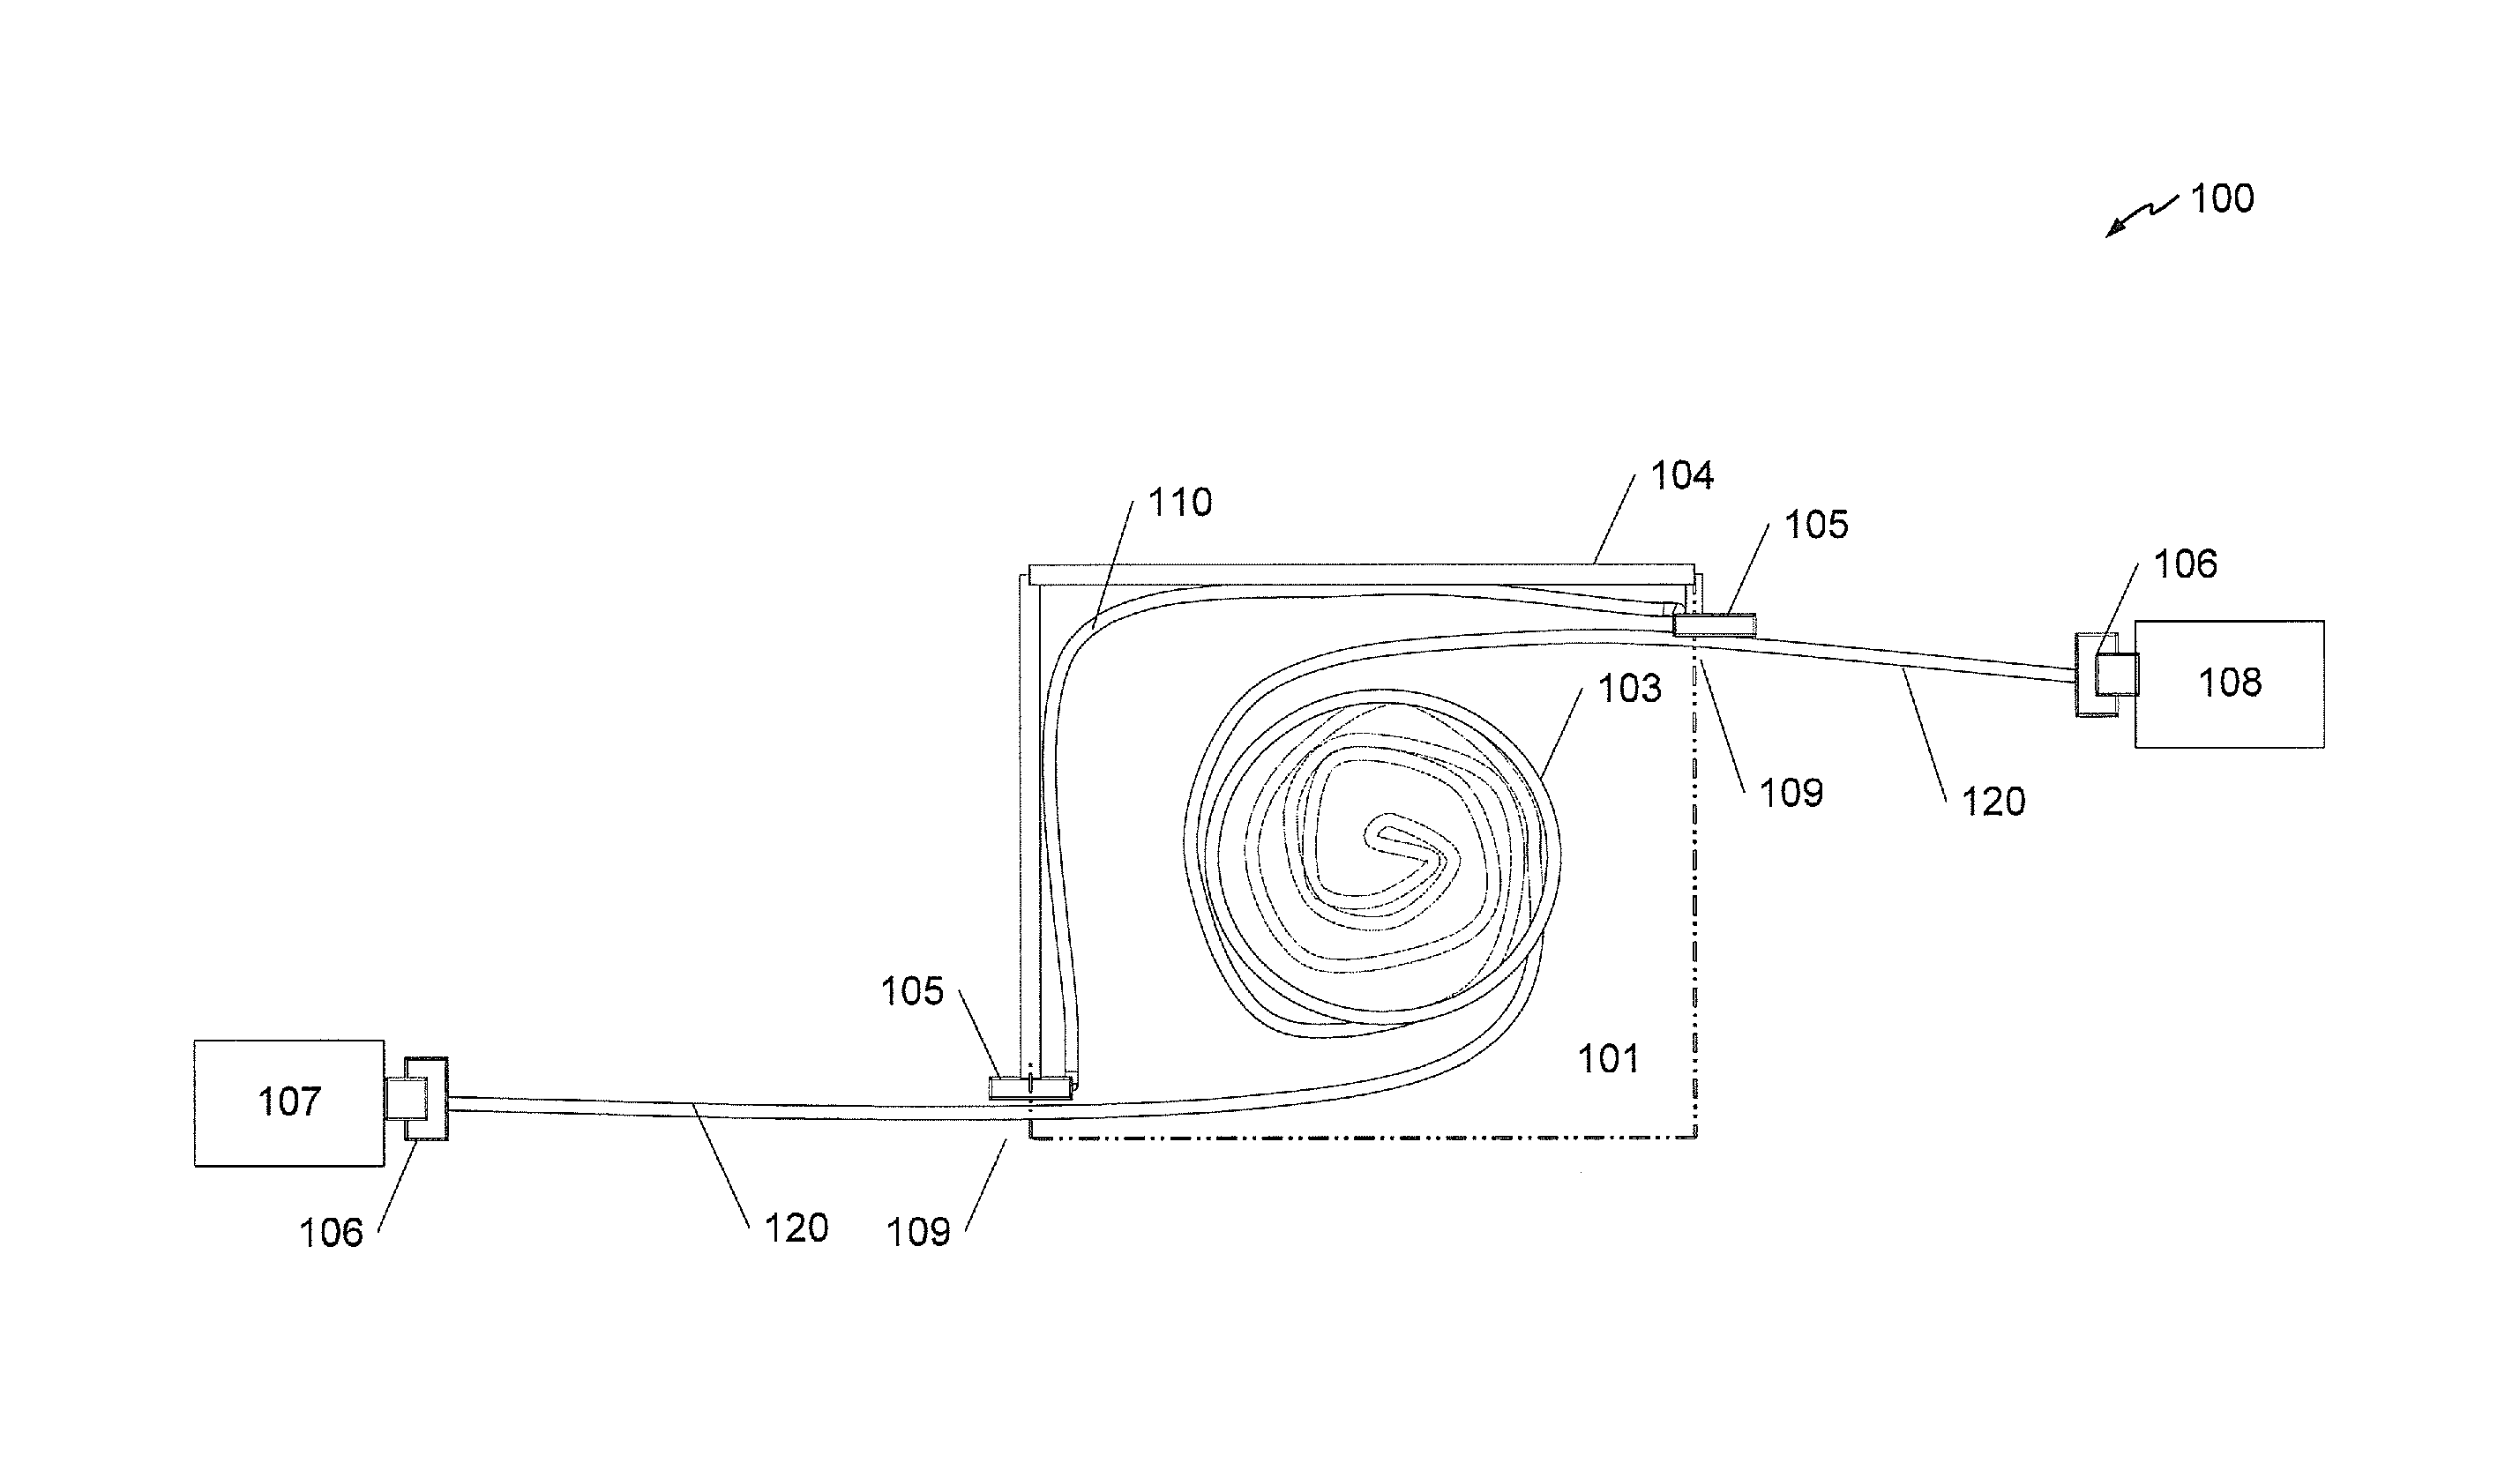 Retractable interconnect device including multiple electrical paths